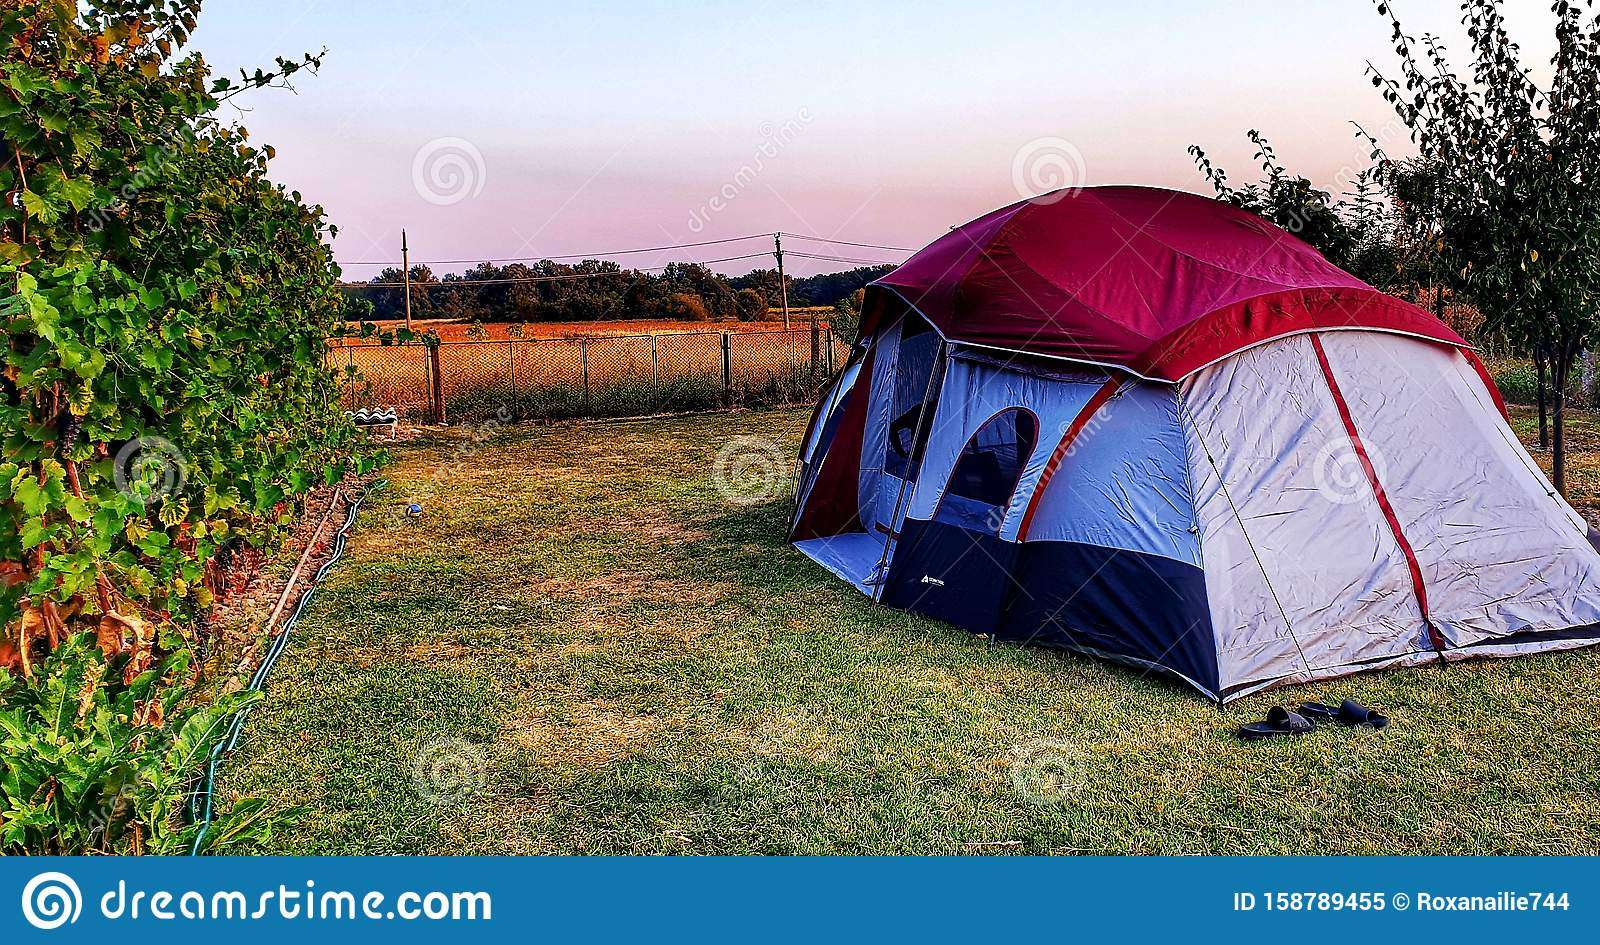 Tent in my backyard stock image. Image of rural, camping ...